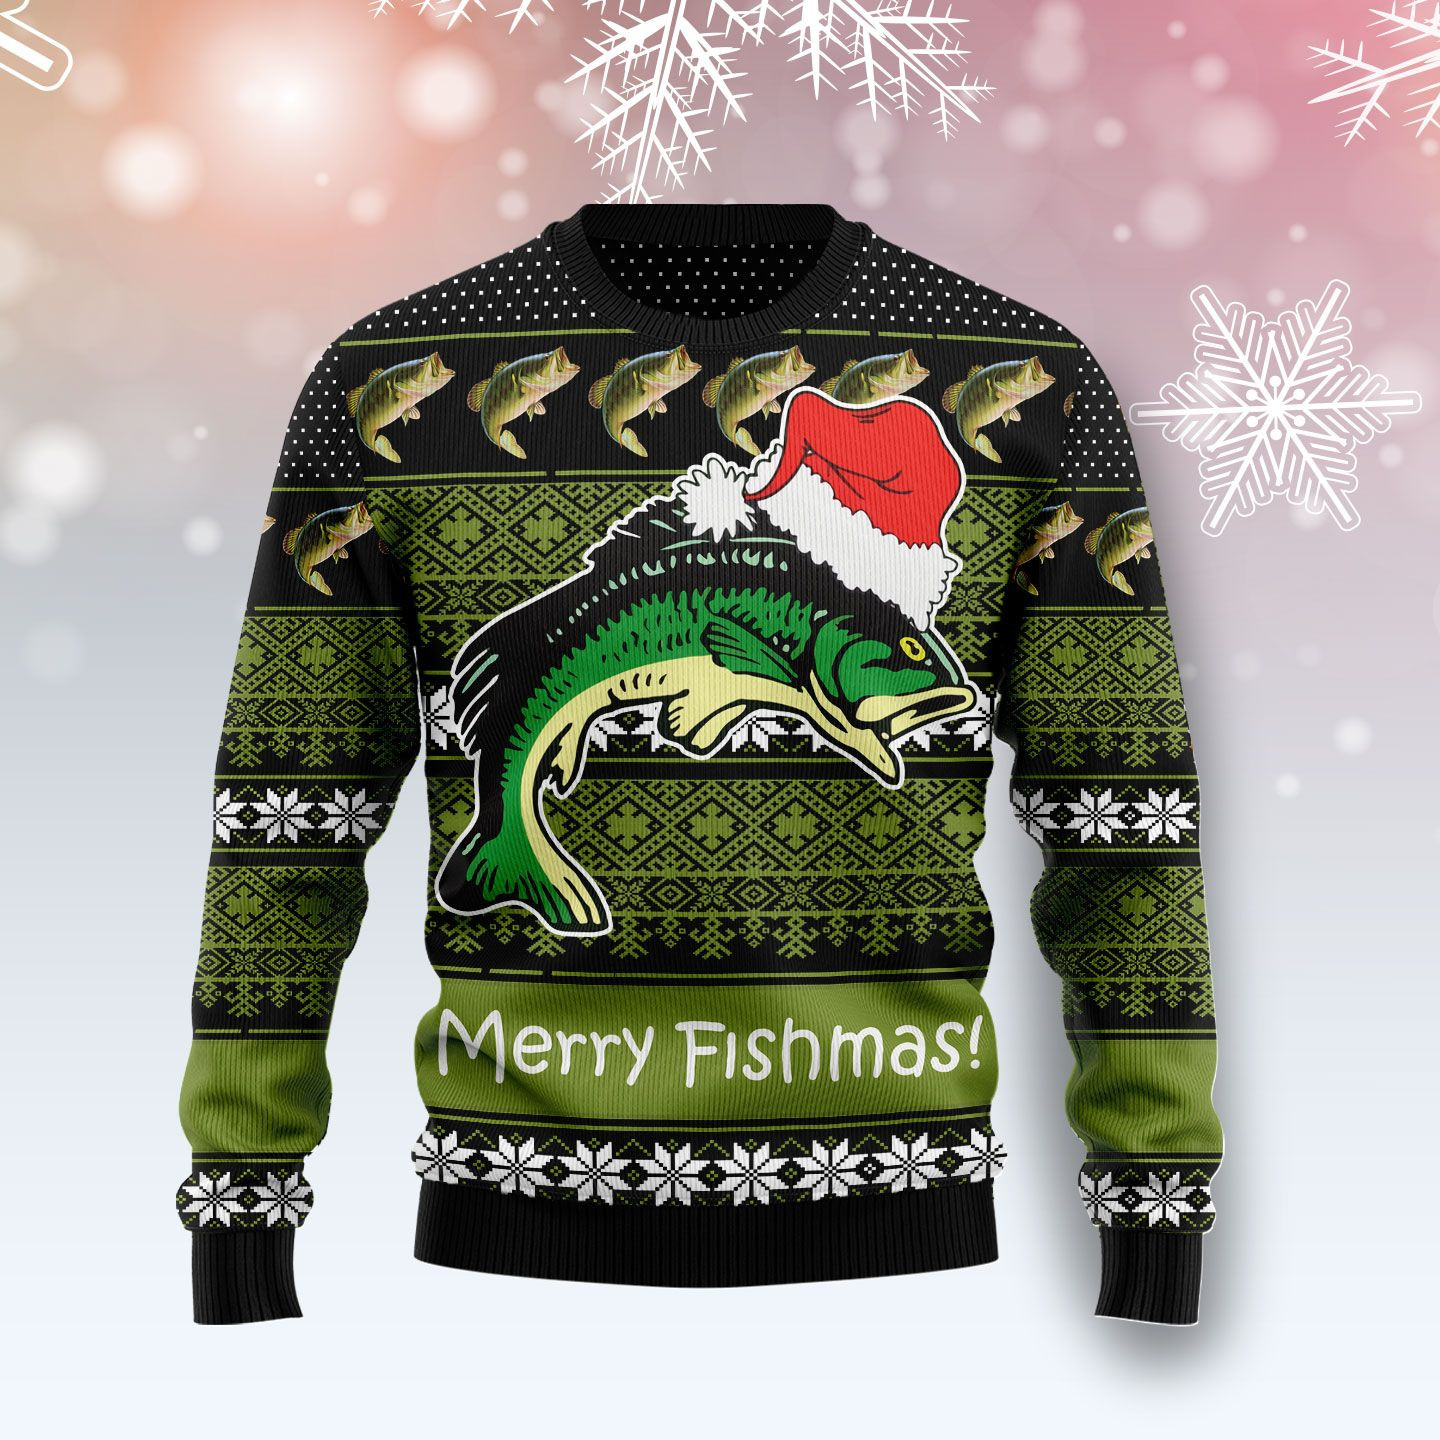 Fishing Merry Fishmas Ugly Christmas Sweater Ugly Sweater For Men Women, Holiday Sweater